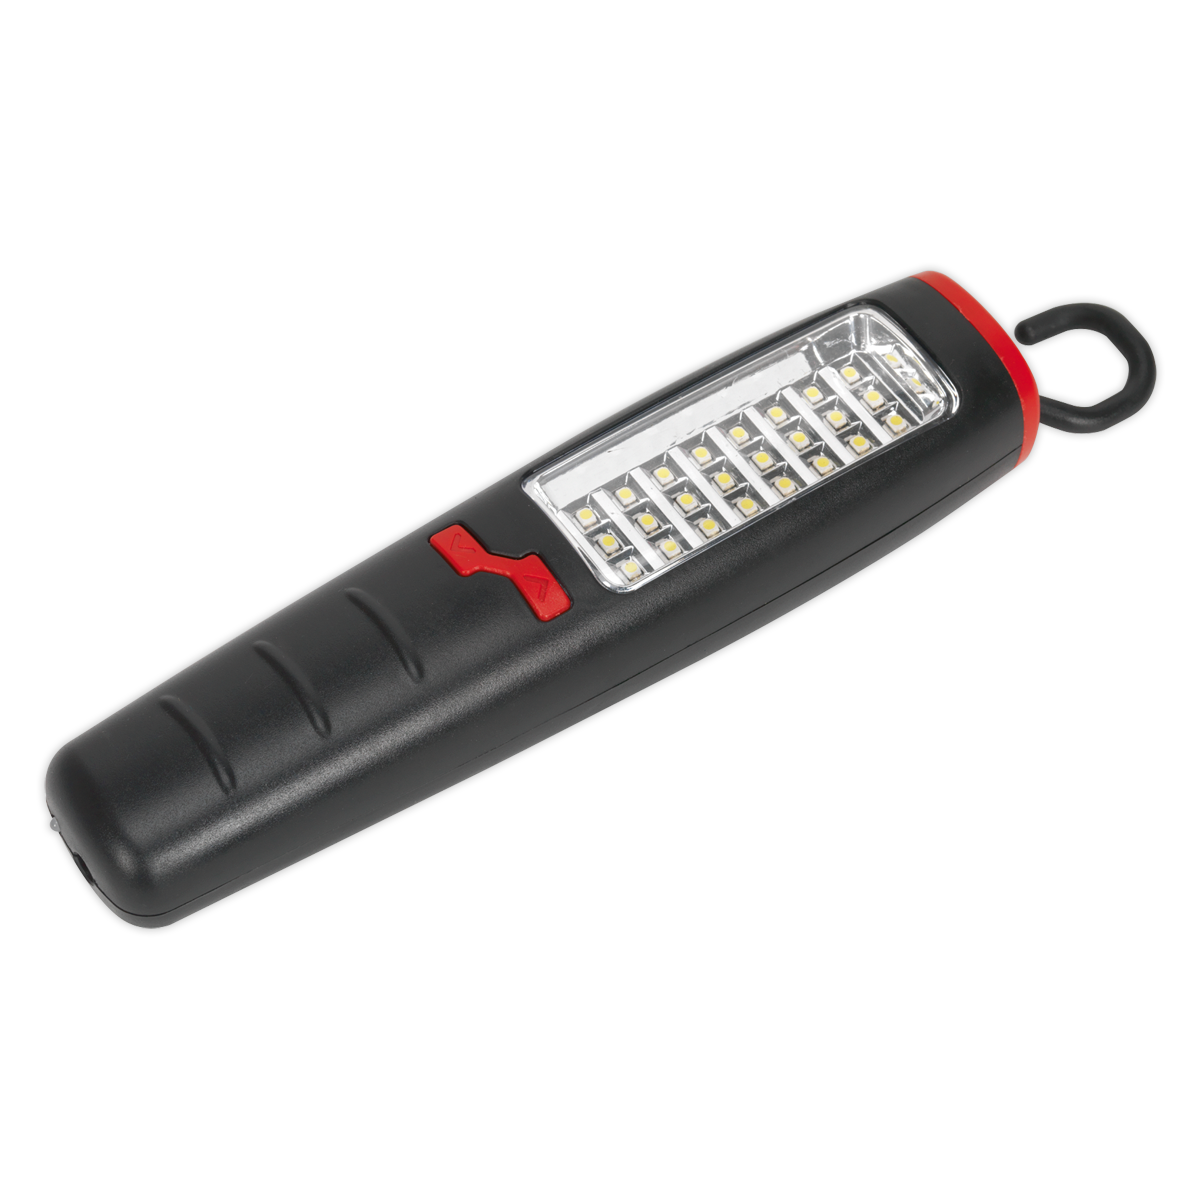 Rechargeable Inspection Light 2.5W & 0.5W SMD LED Lithium-ion - LED307 - Farming Parts